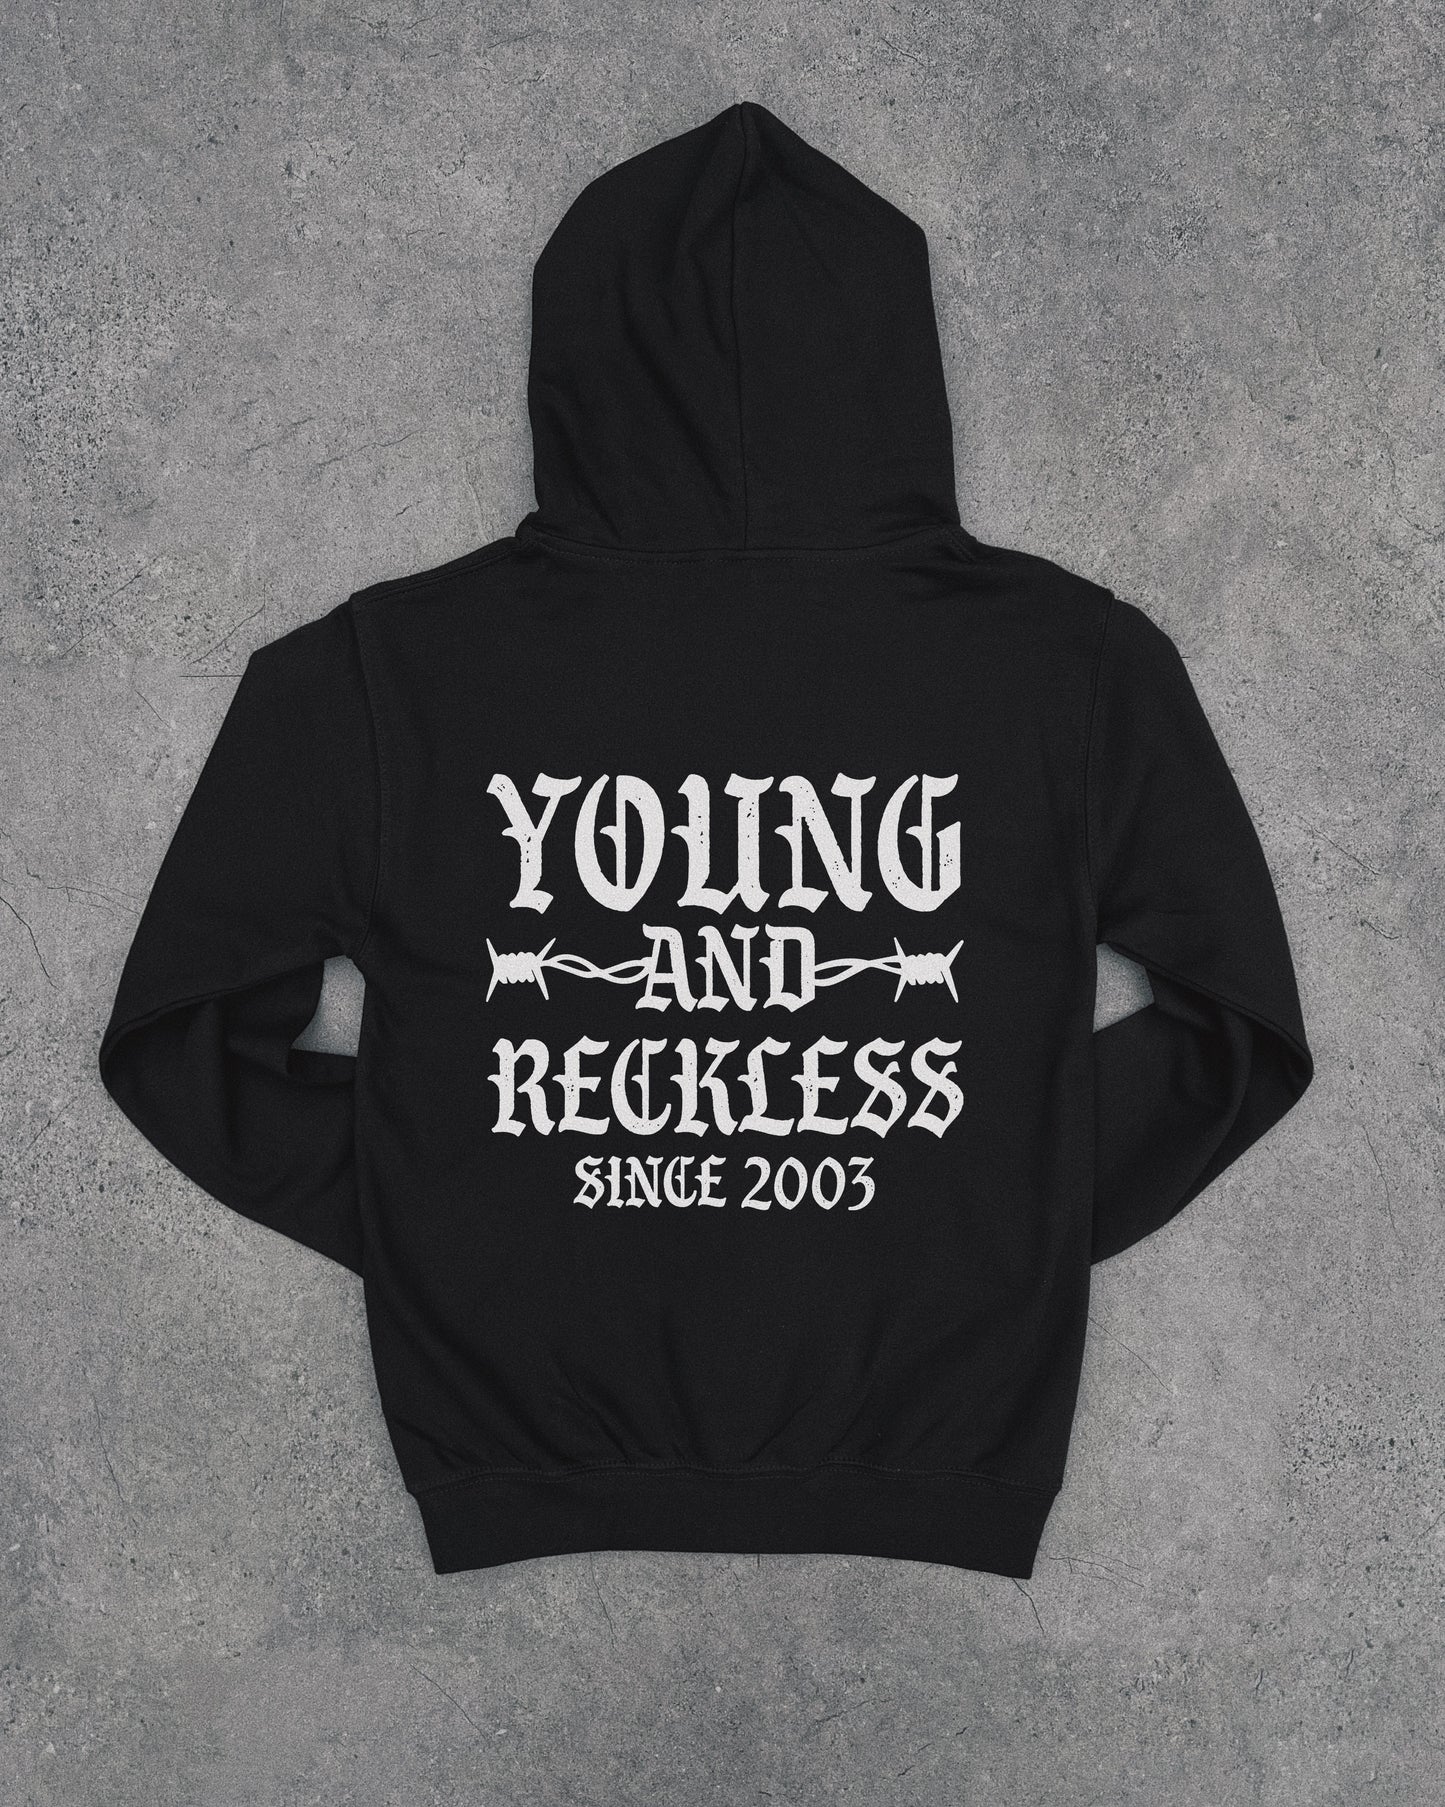 Young & Reckless Barbed Wire - Zip Hoodie